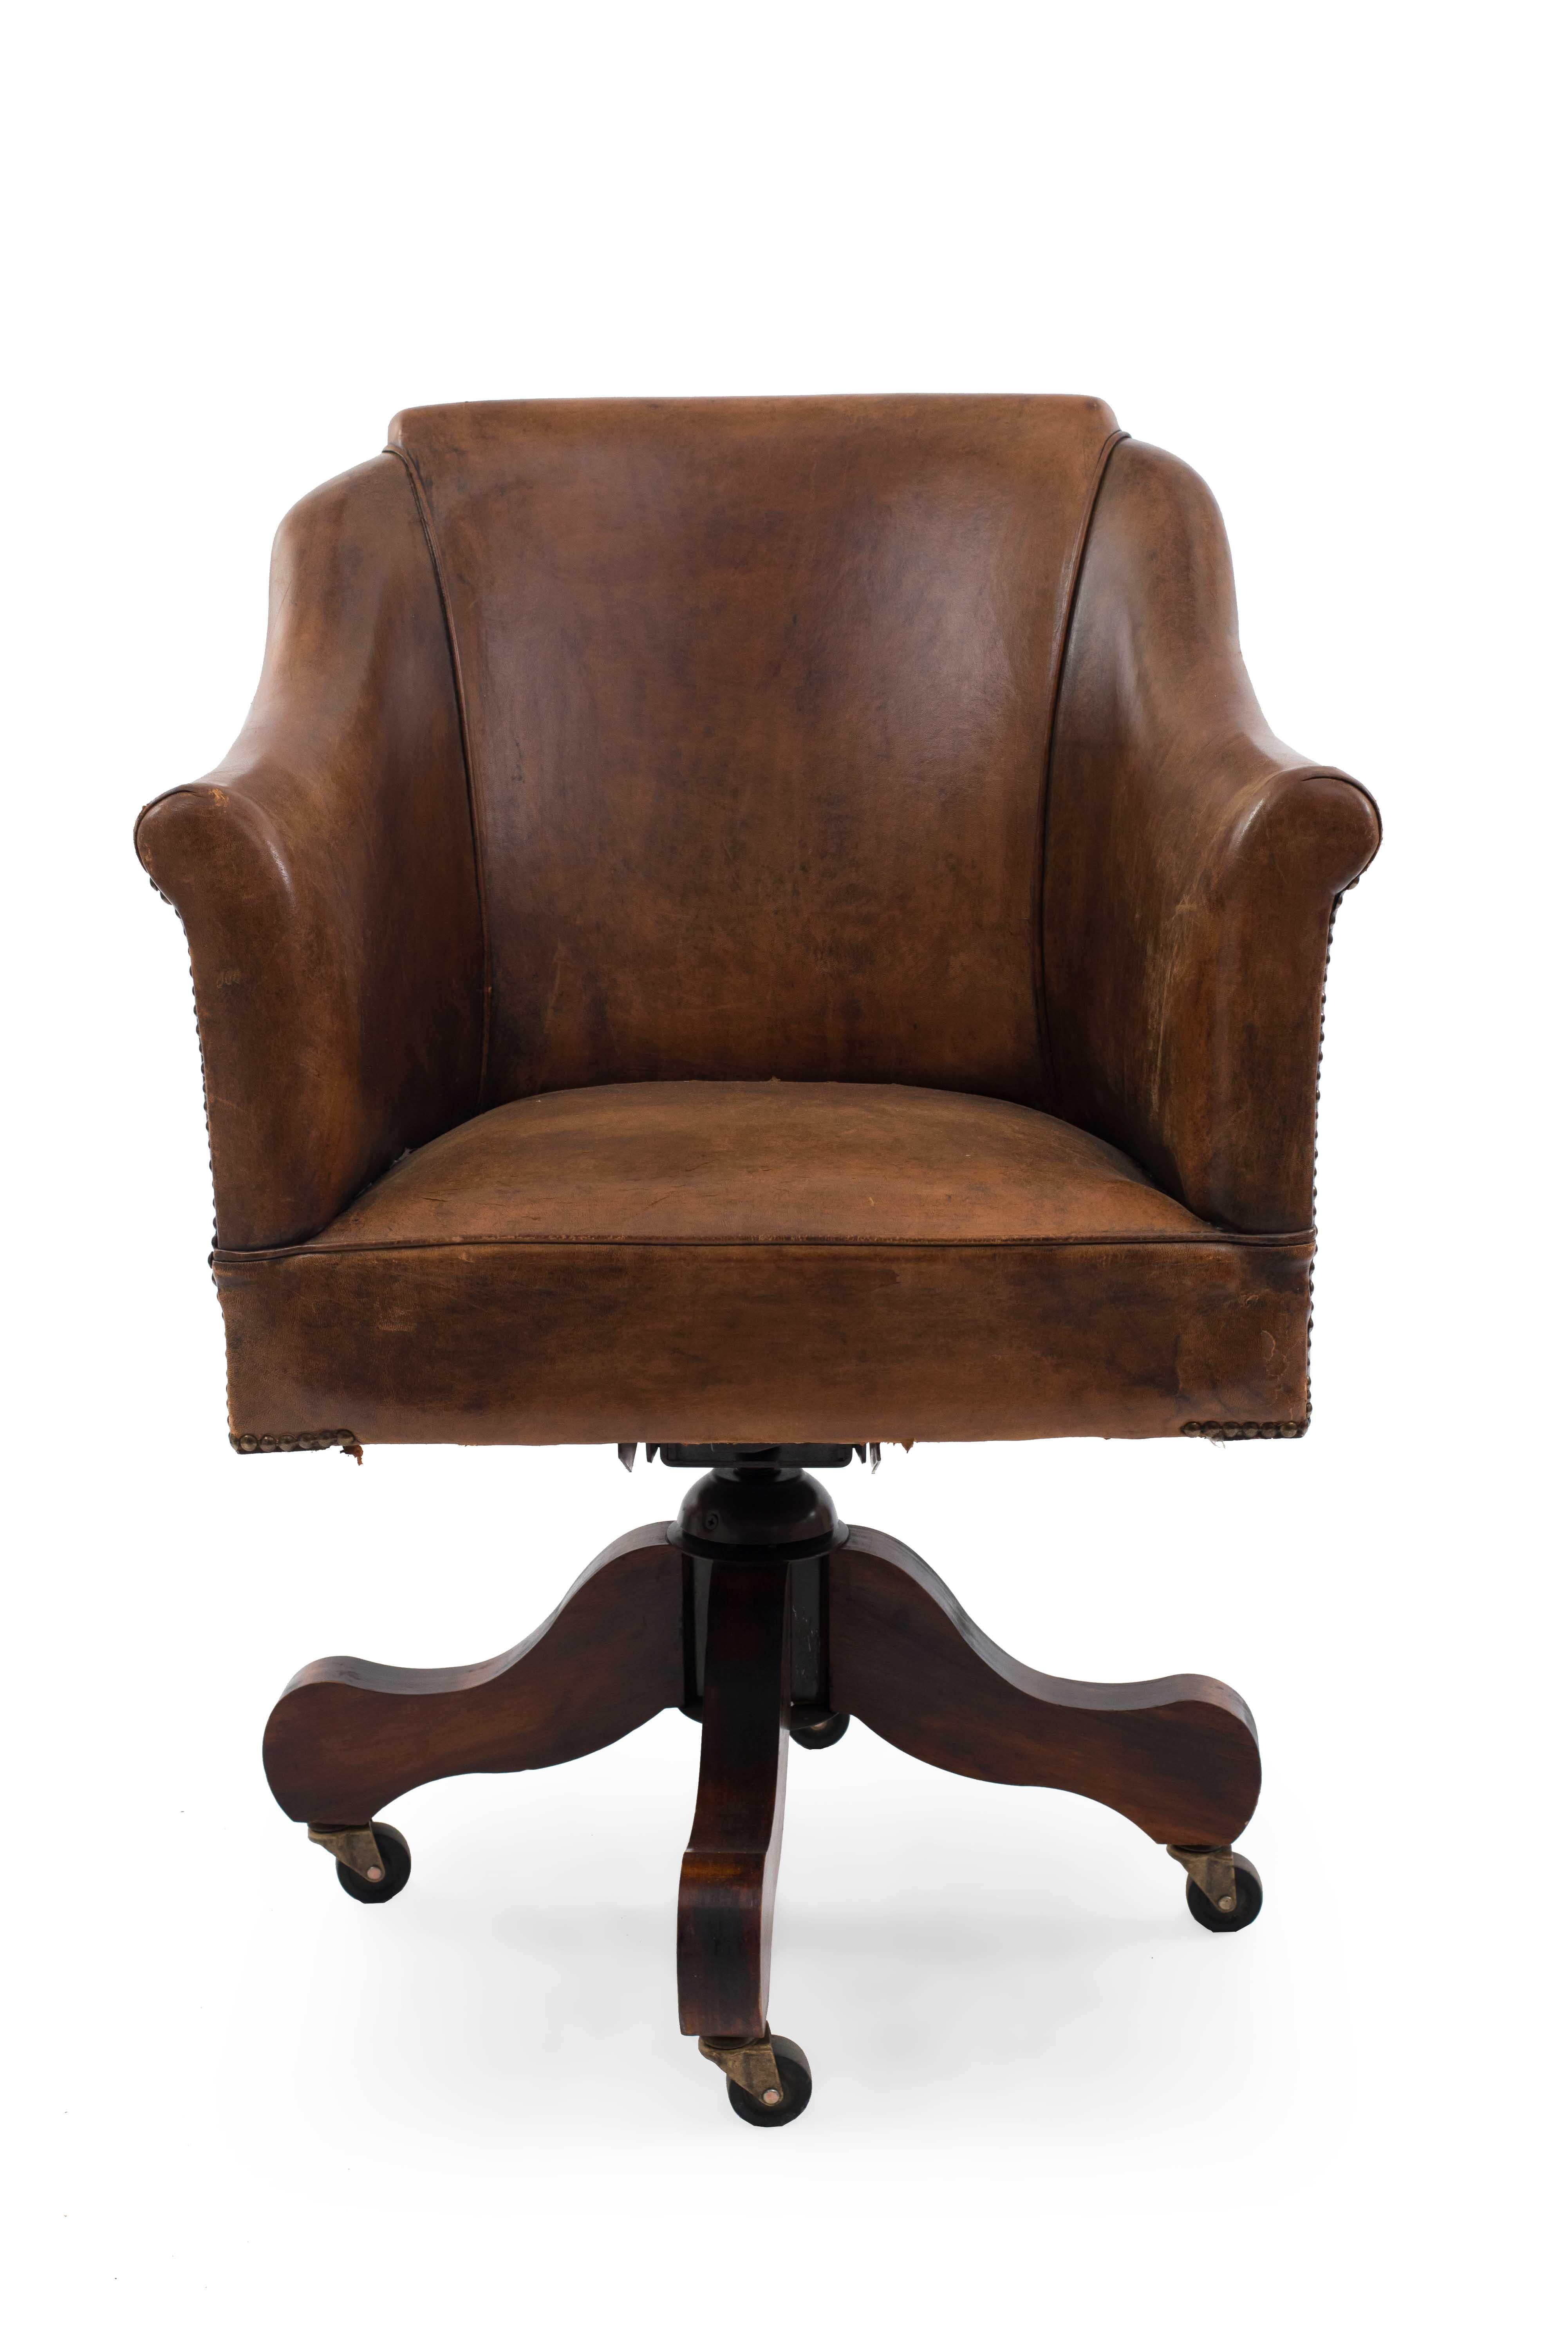 English style brown leather rounded and shaped back swivel chair with flair design arms and nail head trim.